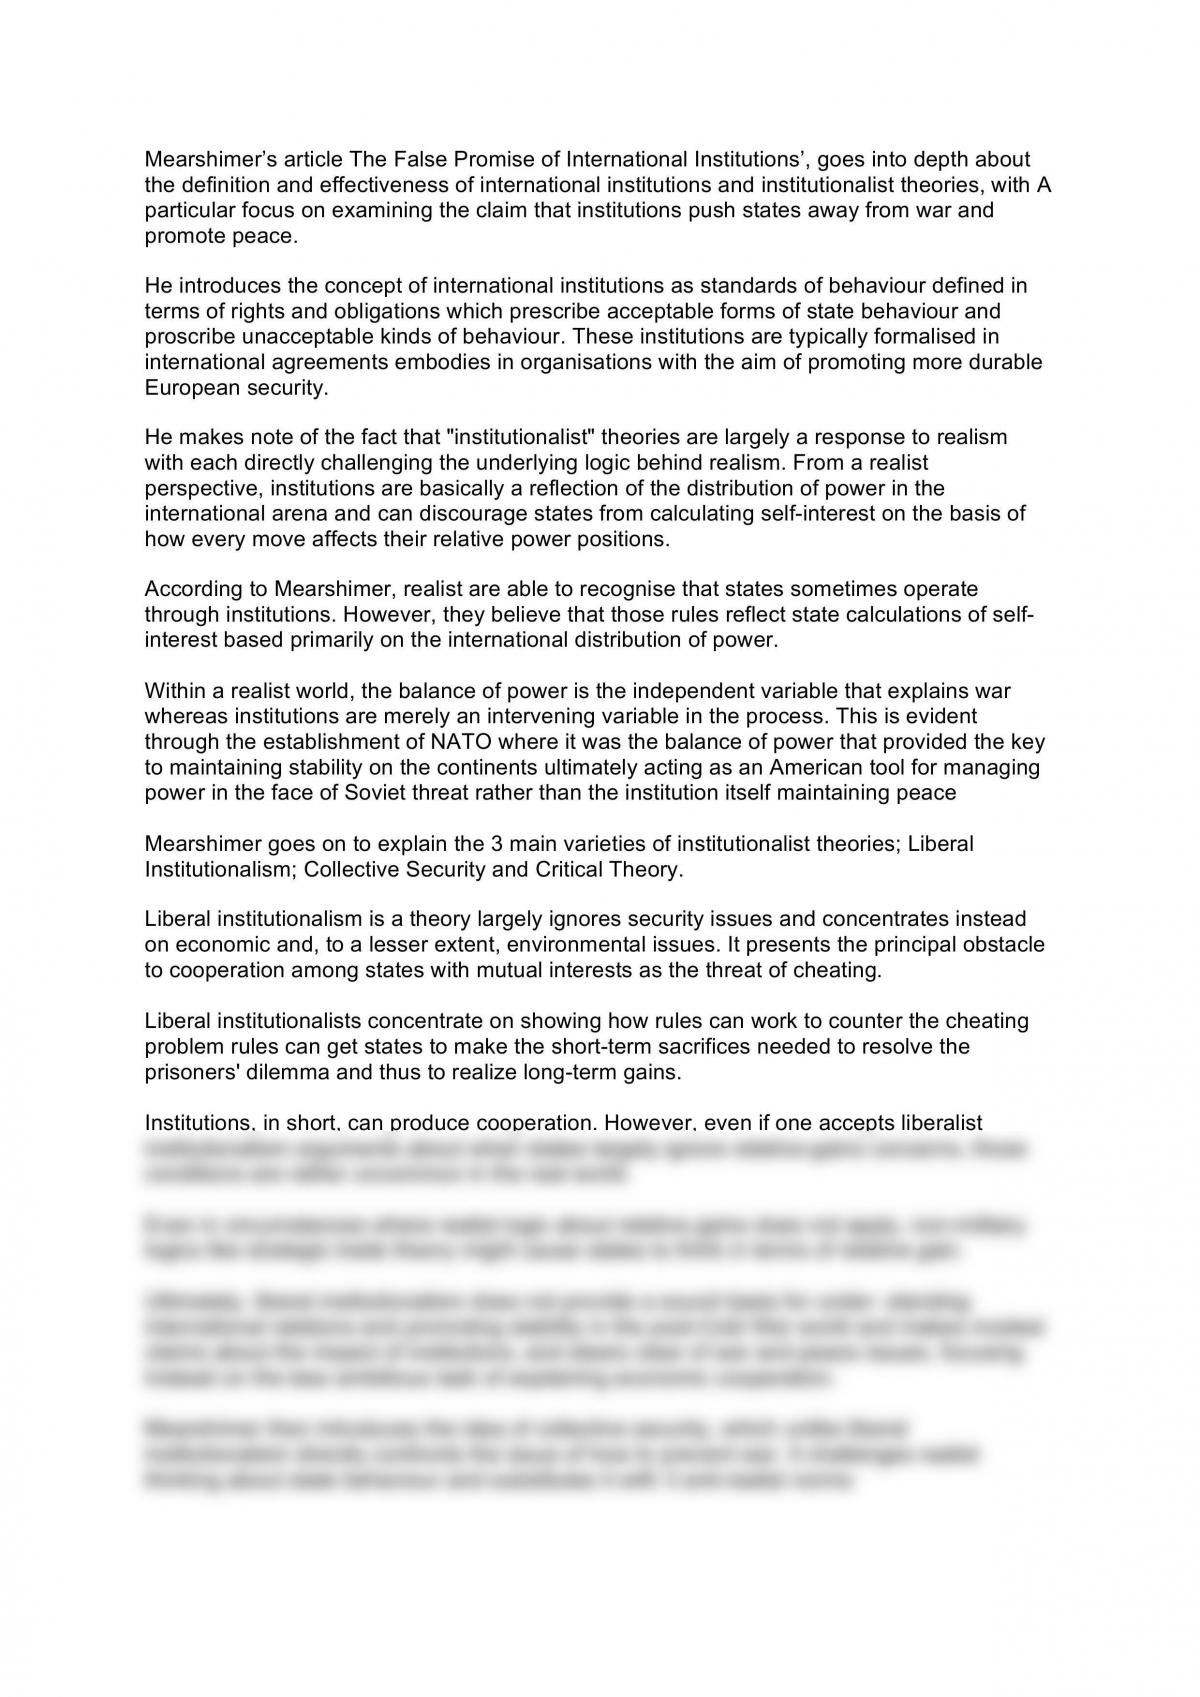 Mearshimer Article Presentation Script - Page 1